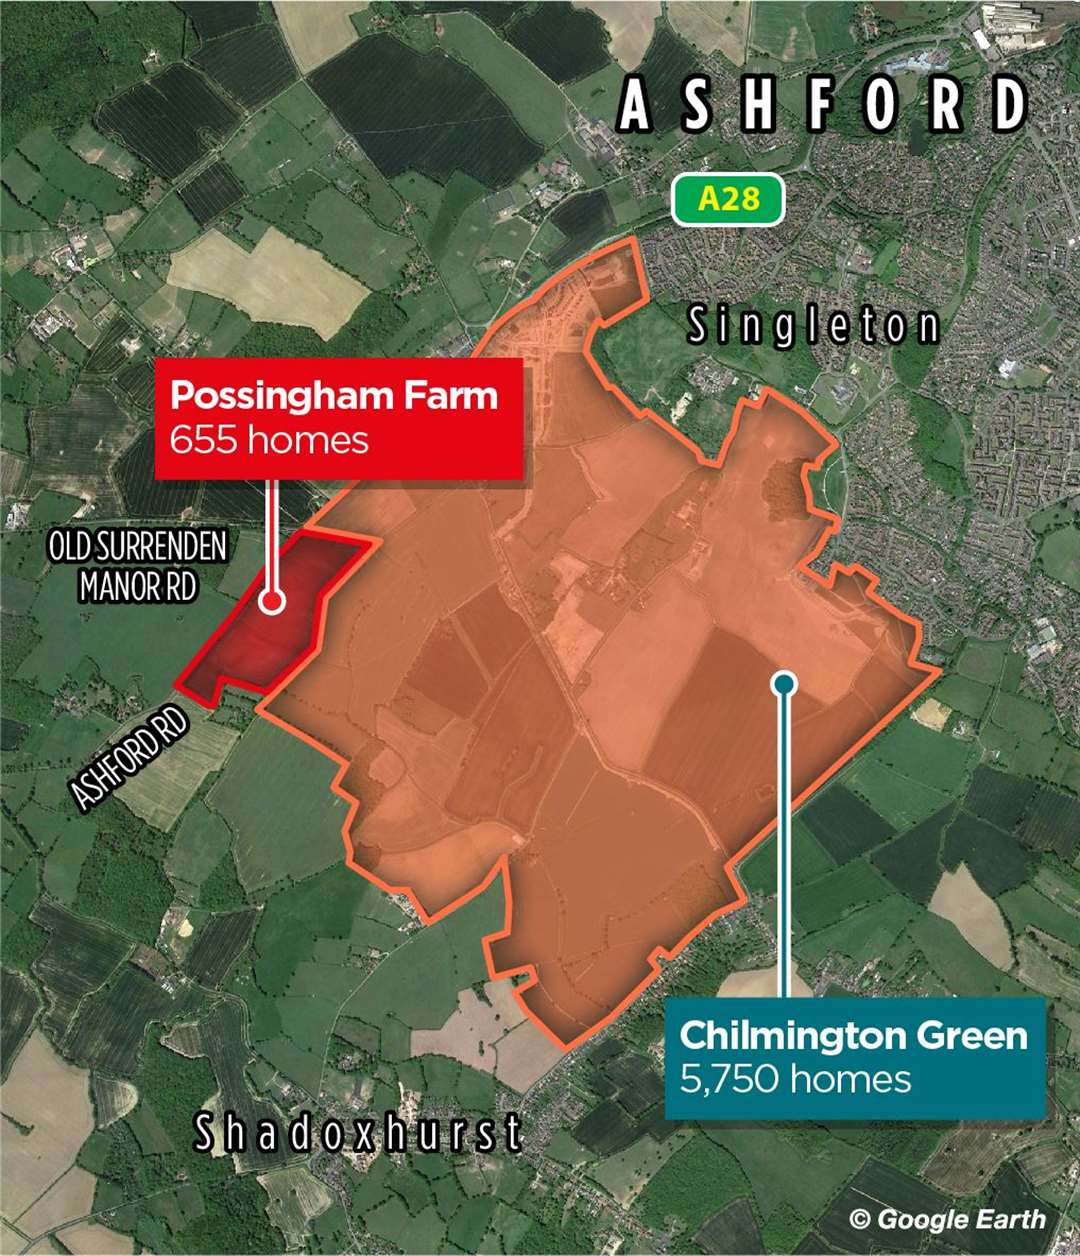 Hodson says the Possingham Farm scheme would complete the 'missing corner' at Chilmington Green